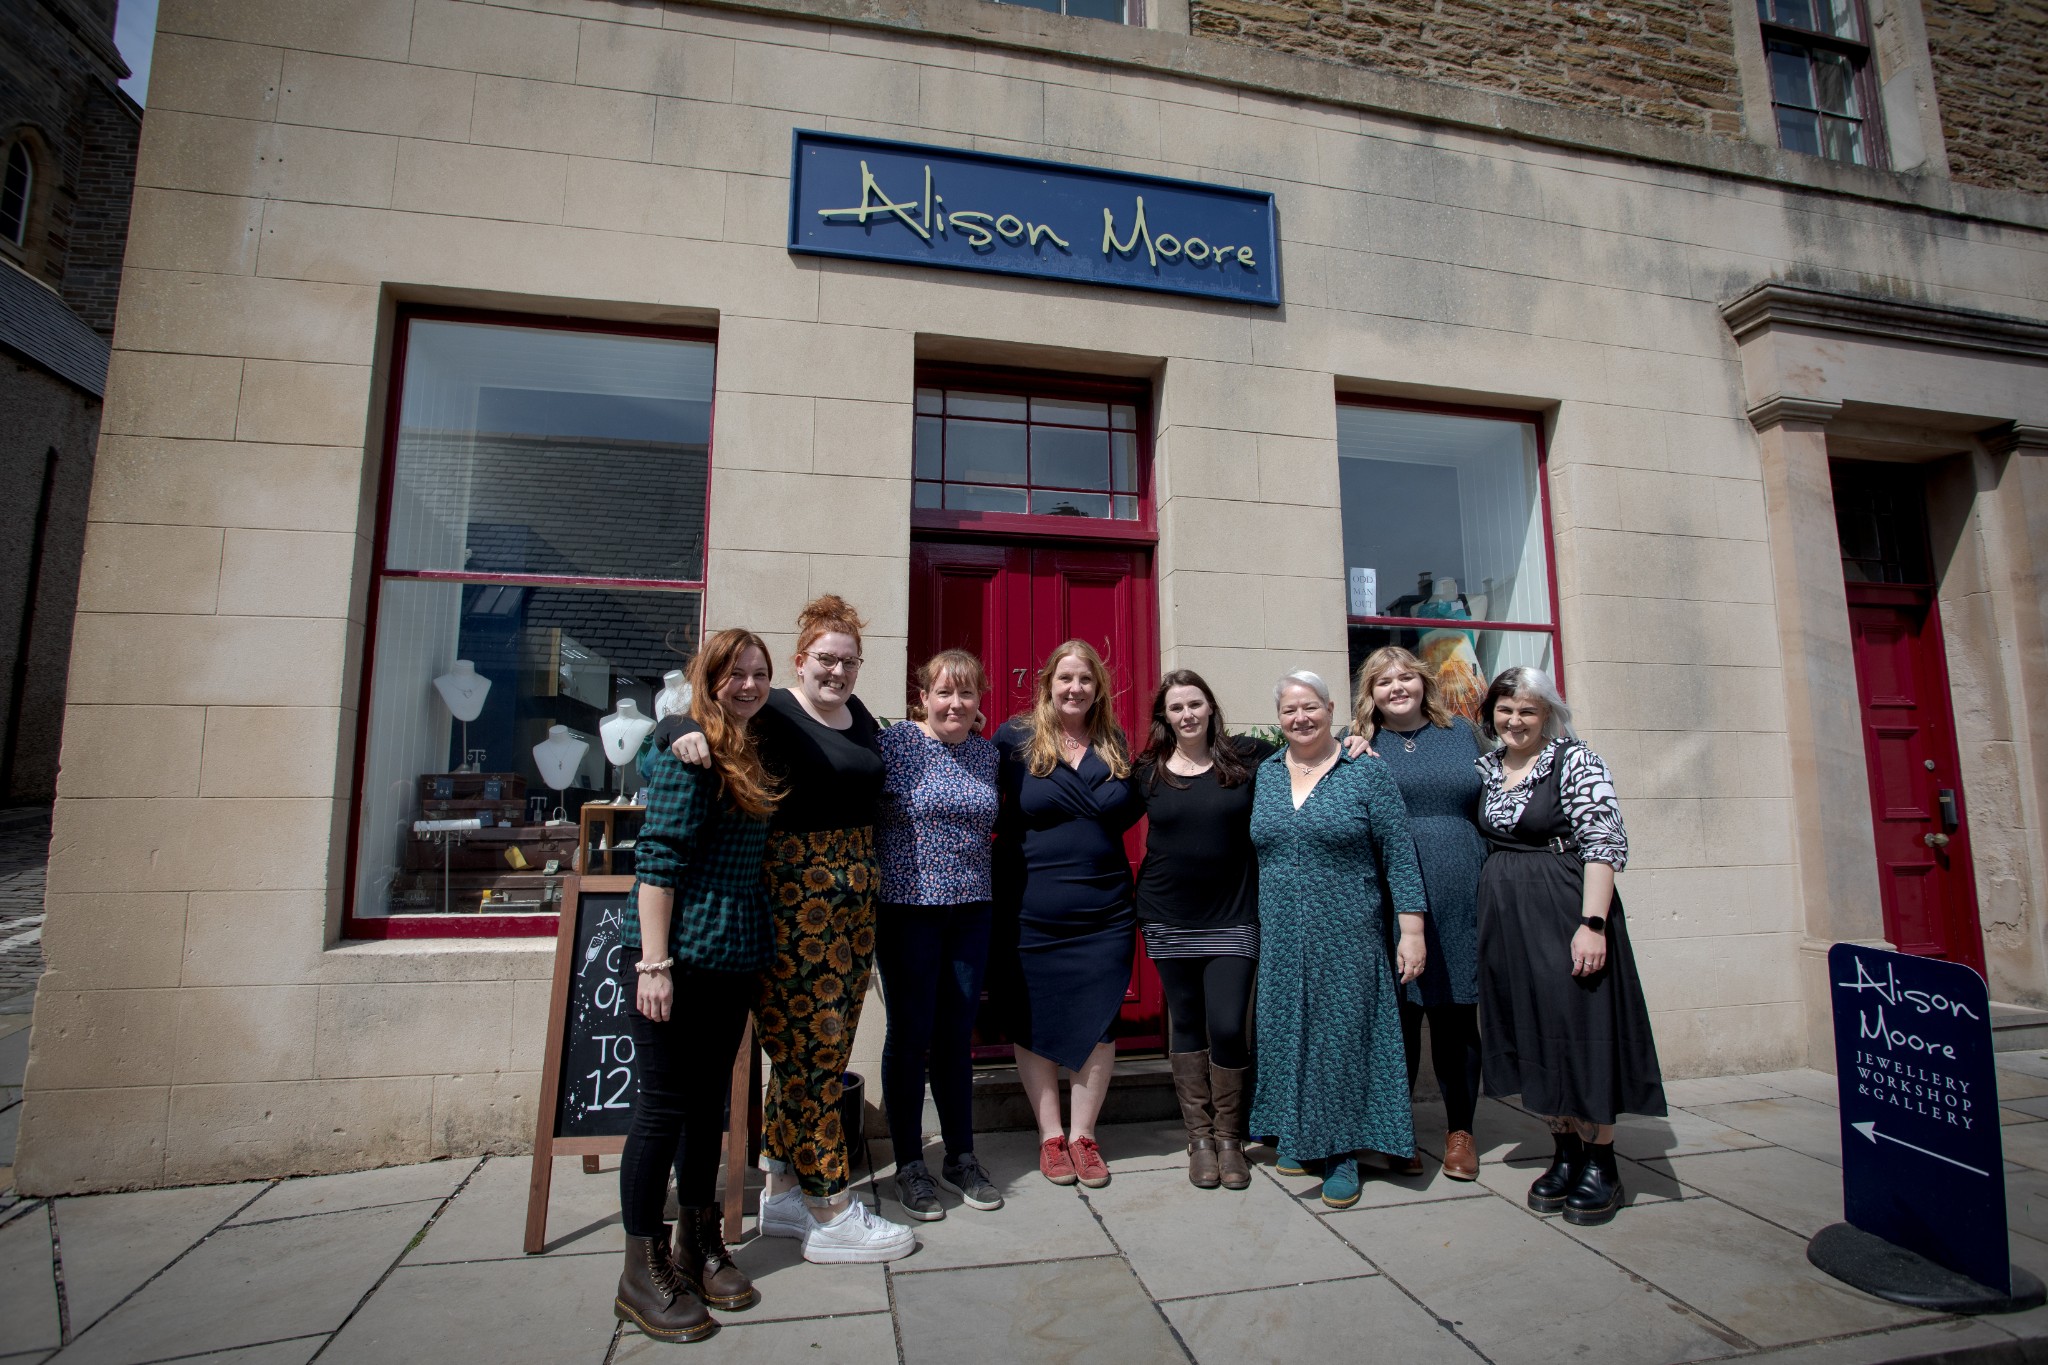 The Alison Moore Designs team at their new home in Stromness, Orkney